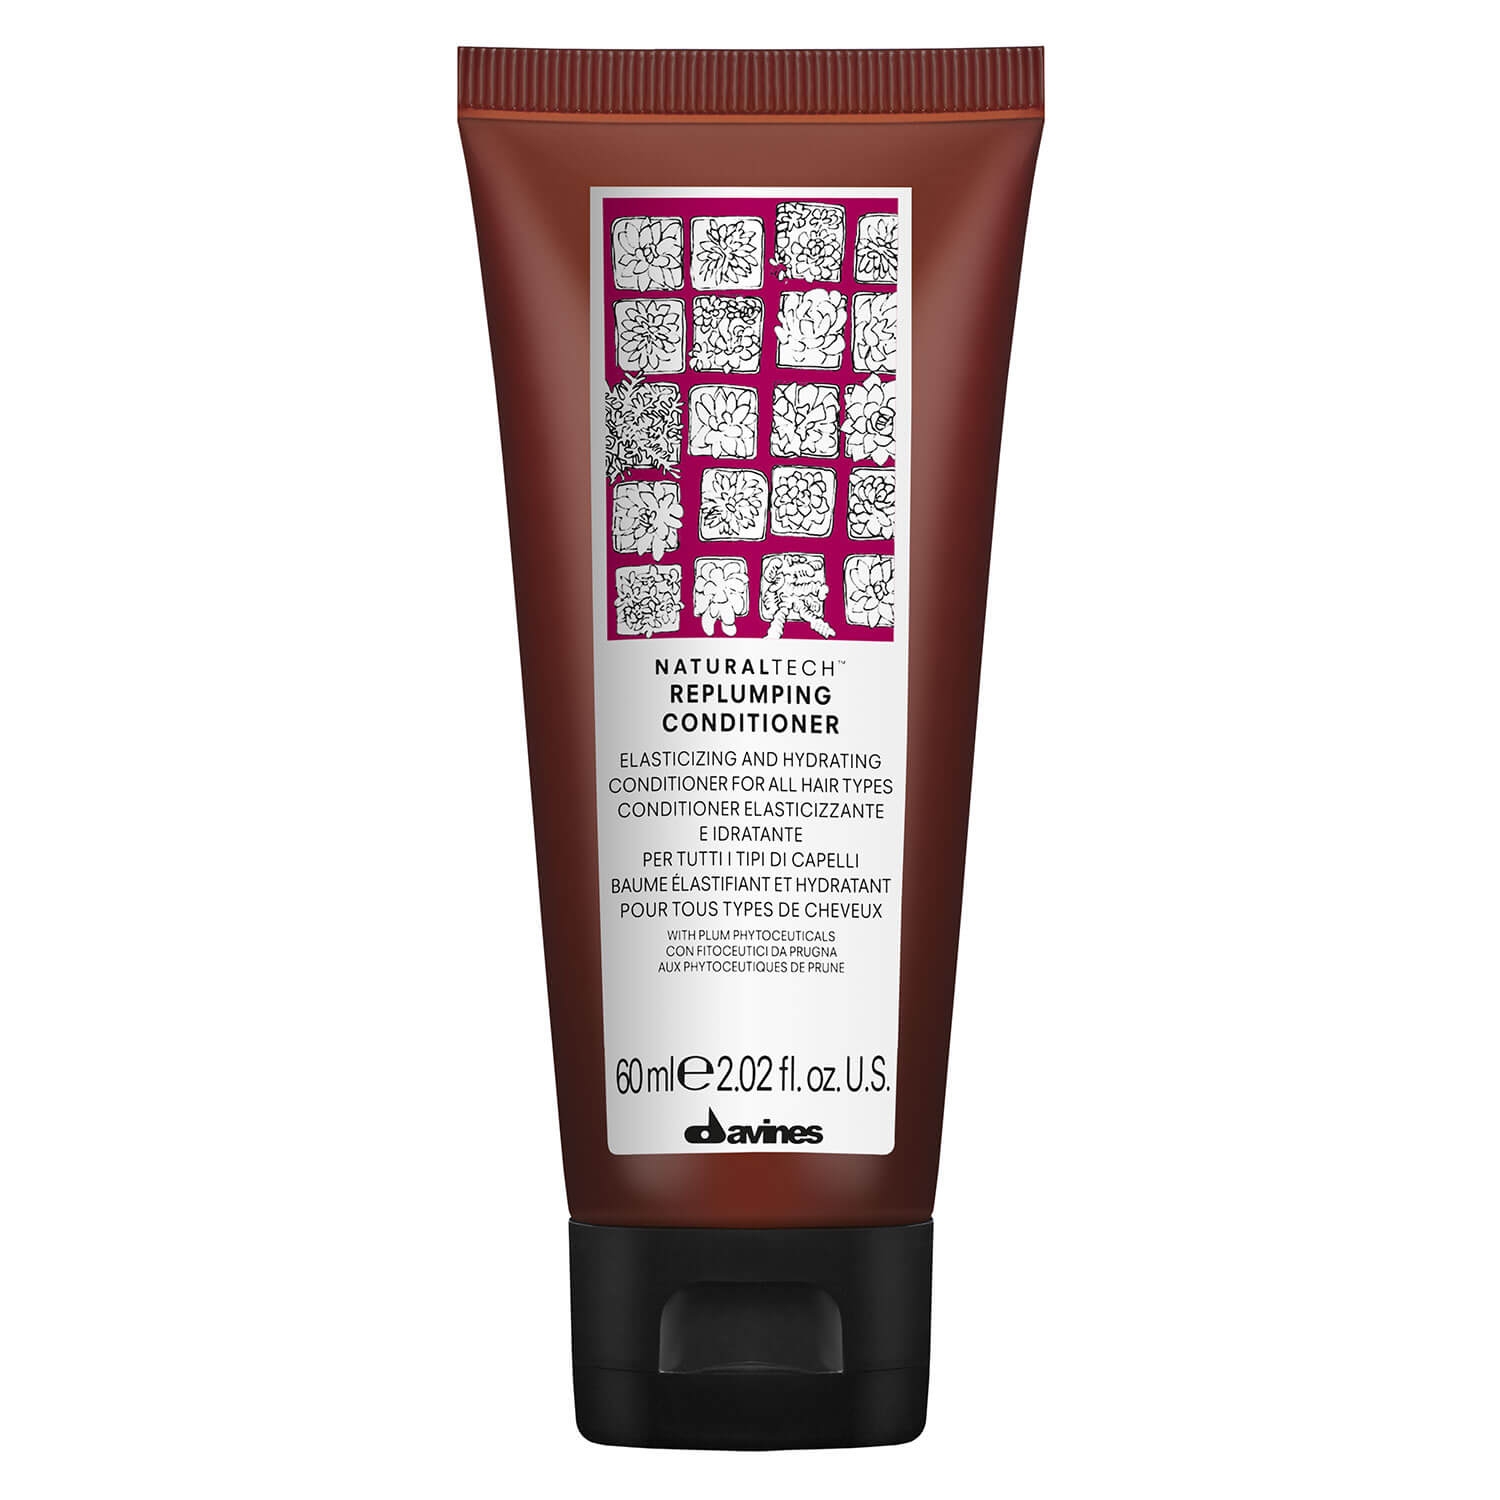 Product image from Naturaltech - Replumping Conditioner